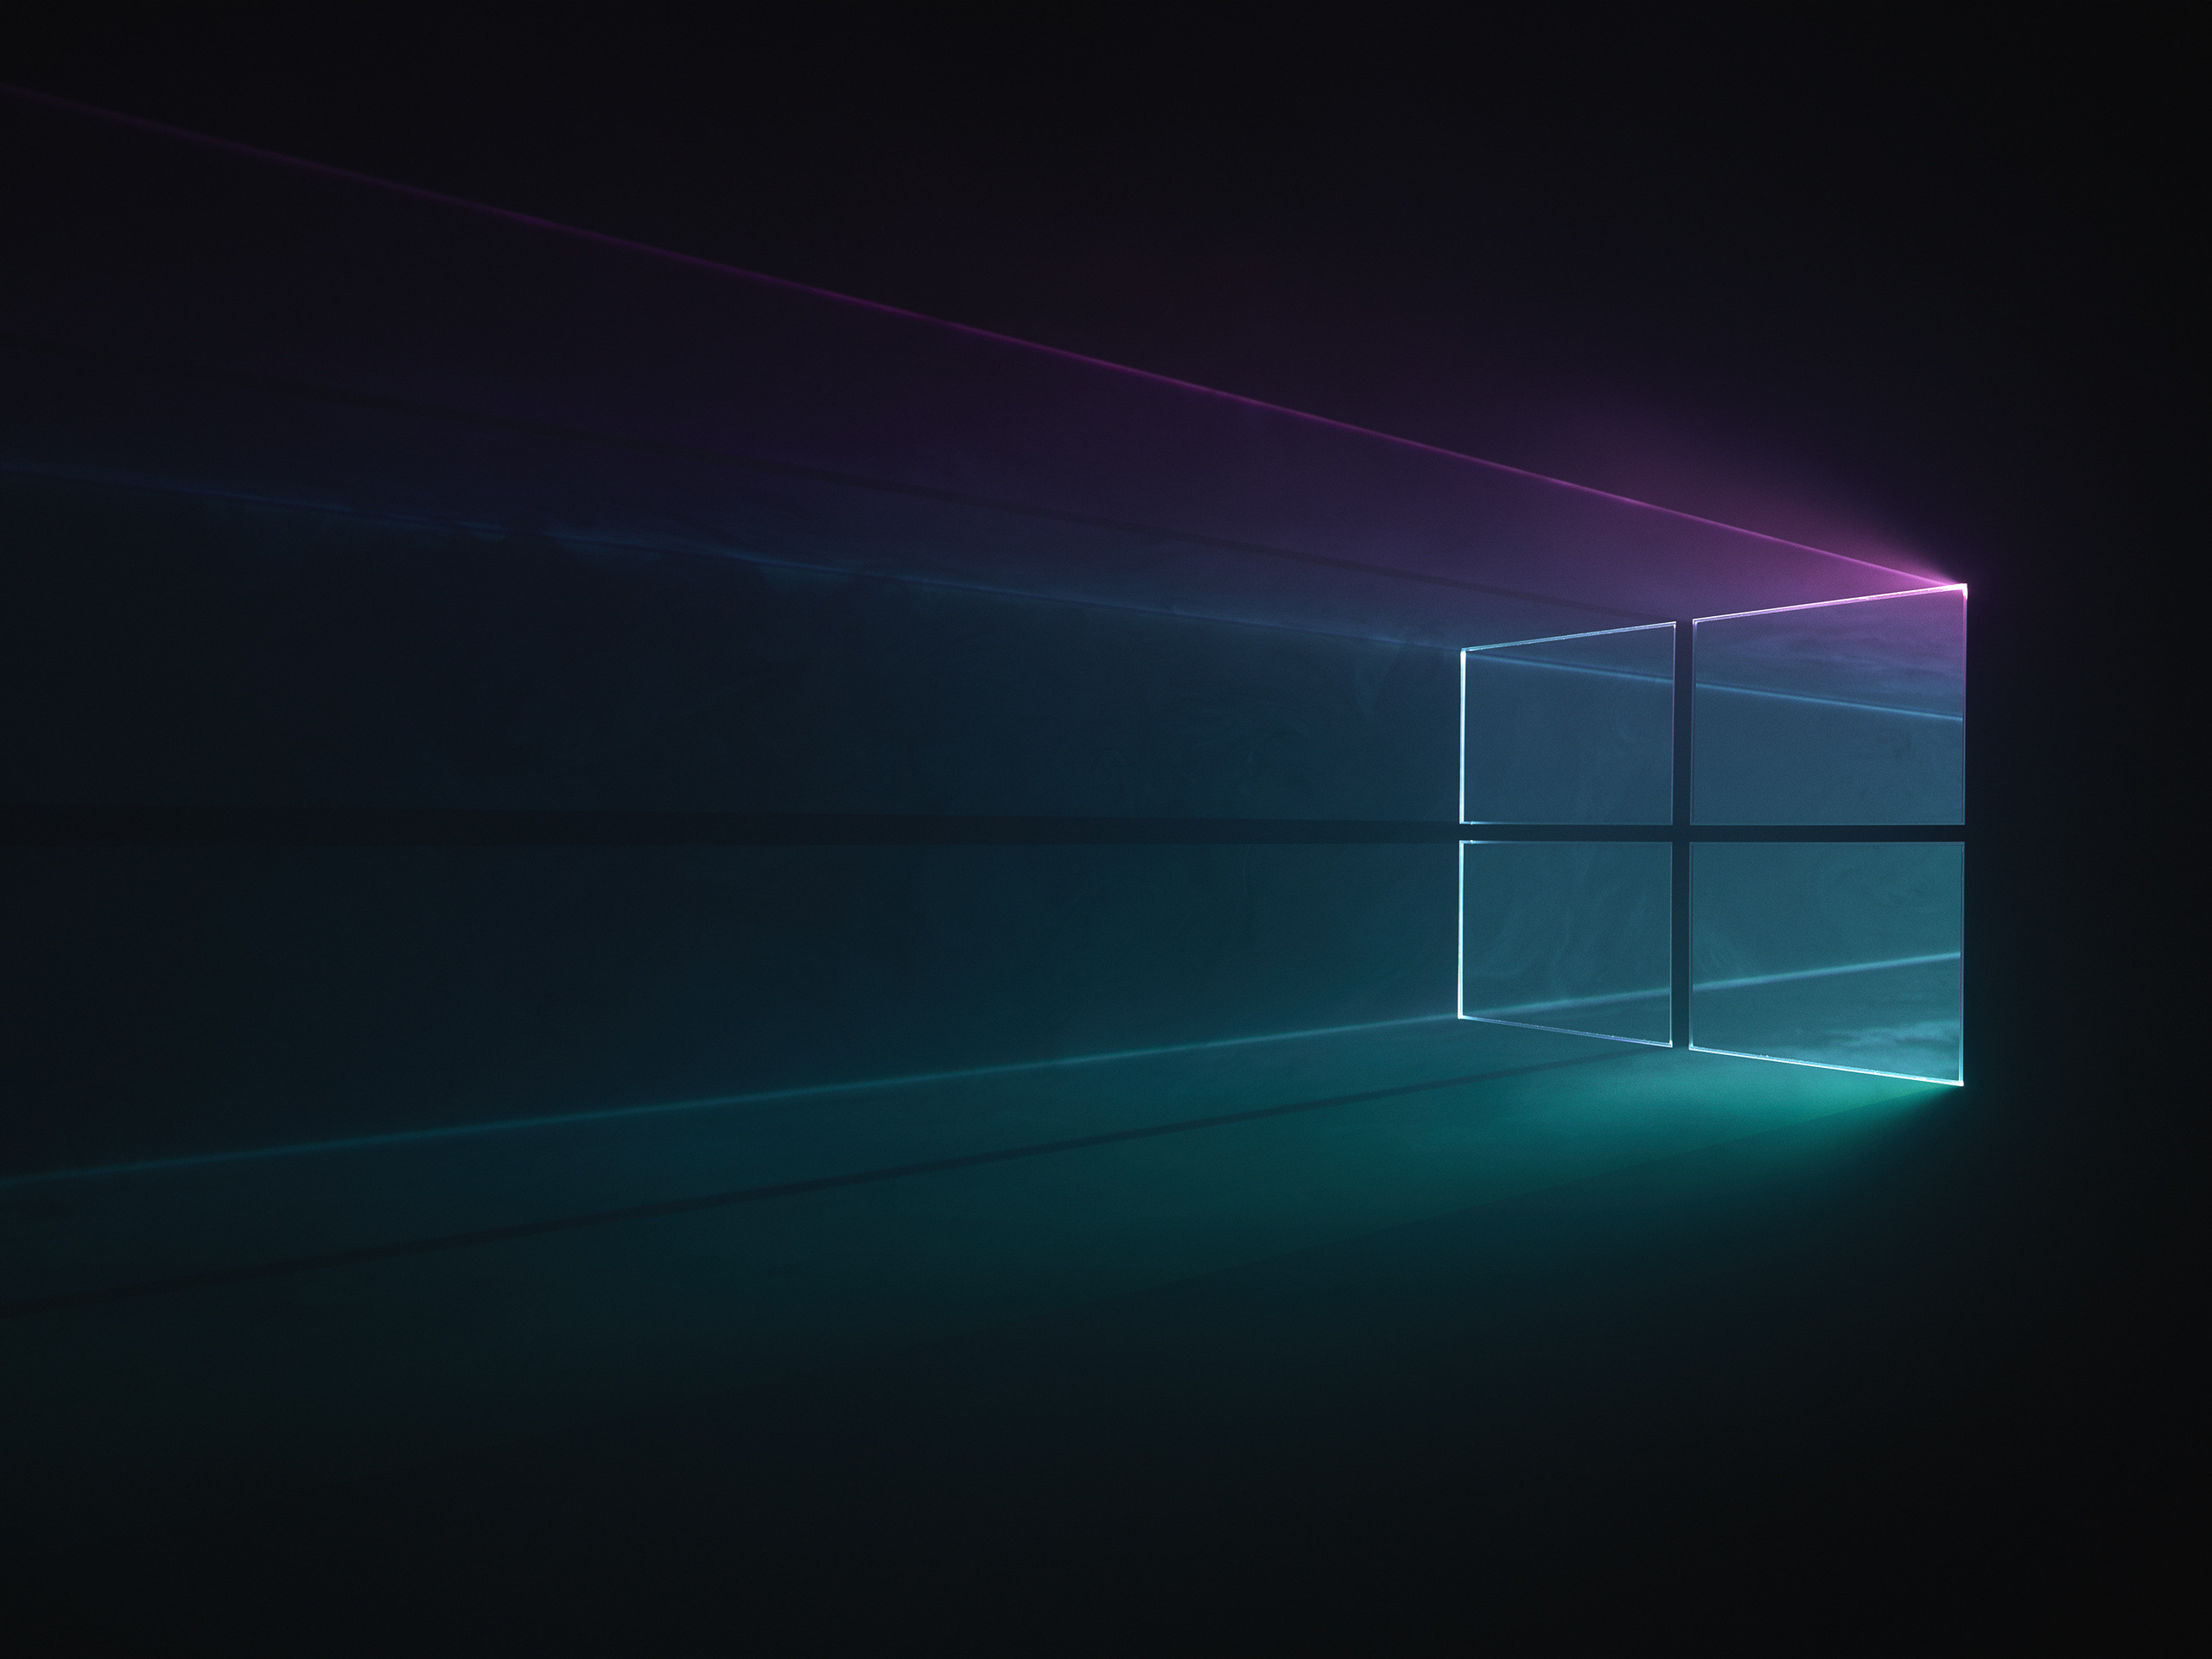 2560x1920 ... that brought a dark, moody definition and a distinctive, provocative  take. It gave the Windows logo a sense of mystery that's powerful in its  own way.